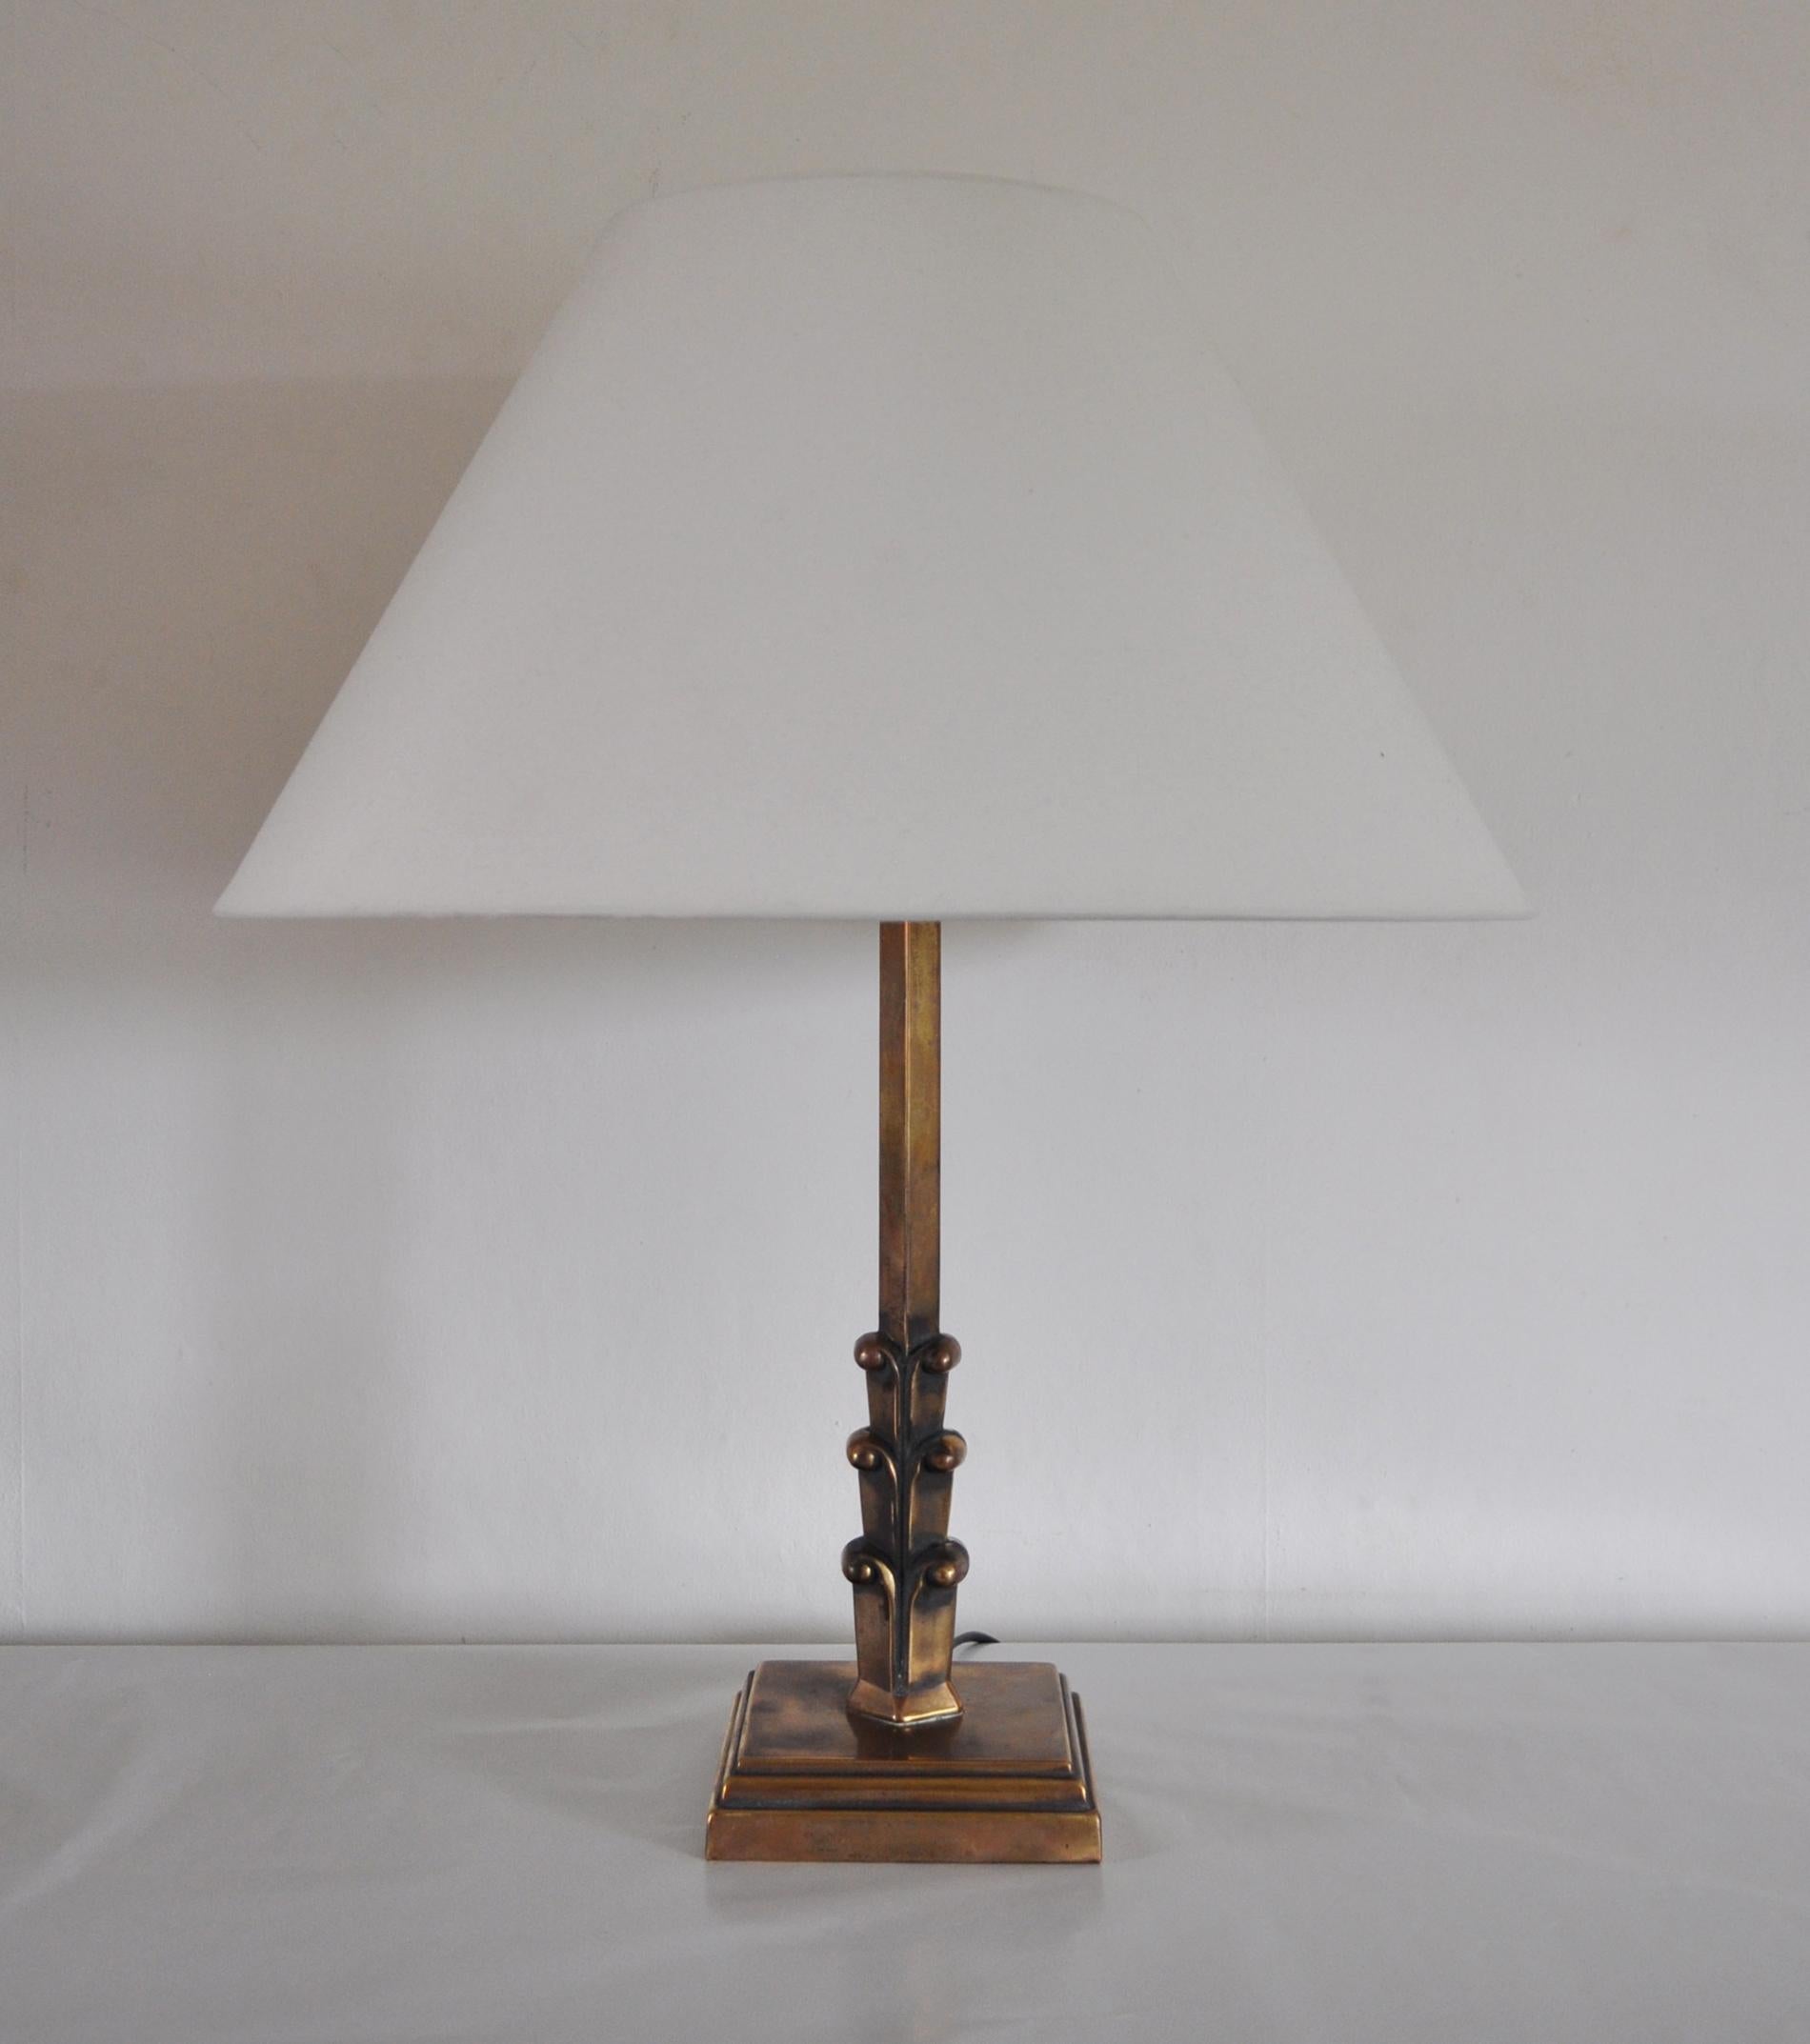 Art Deco table lamp, Scandinavia 1930s.
Fine vintage condition with a beautiful patination, signs of wear consistent with age and use. Because of the age of the lamp the brass contains a high percentage of copper which gives a reddish